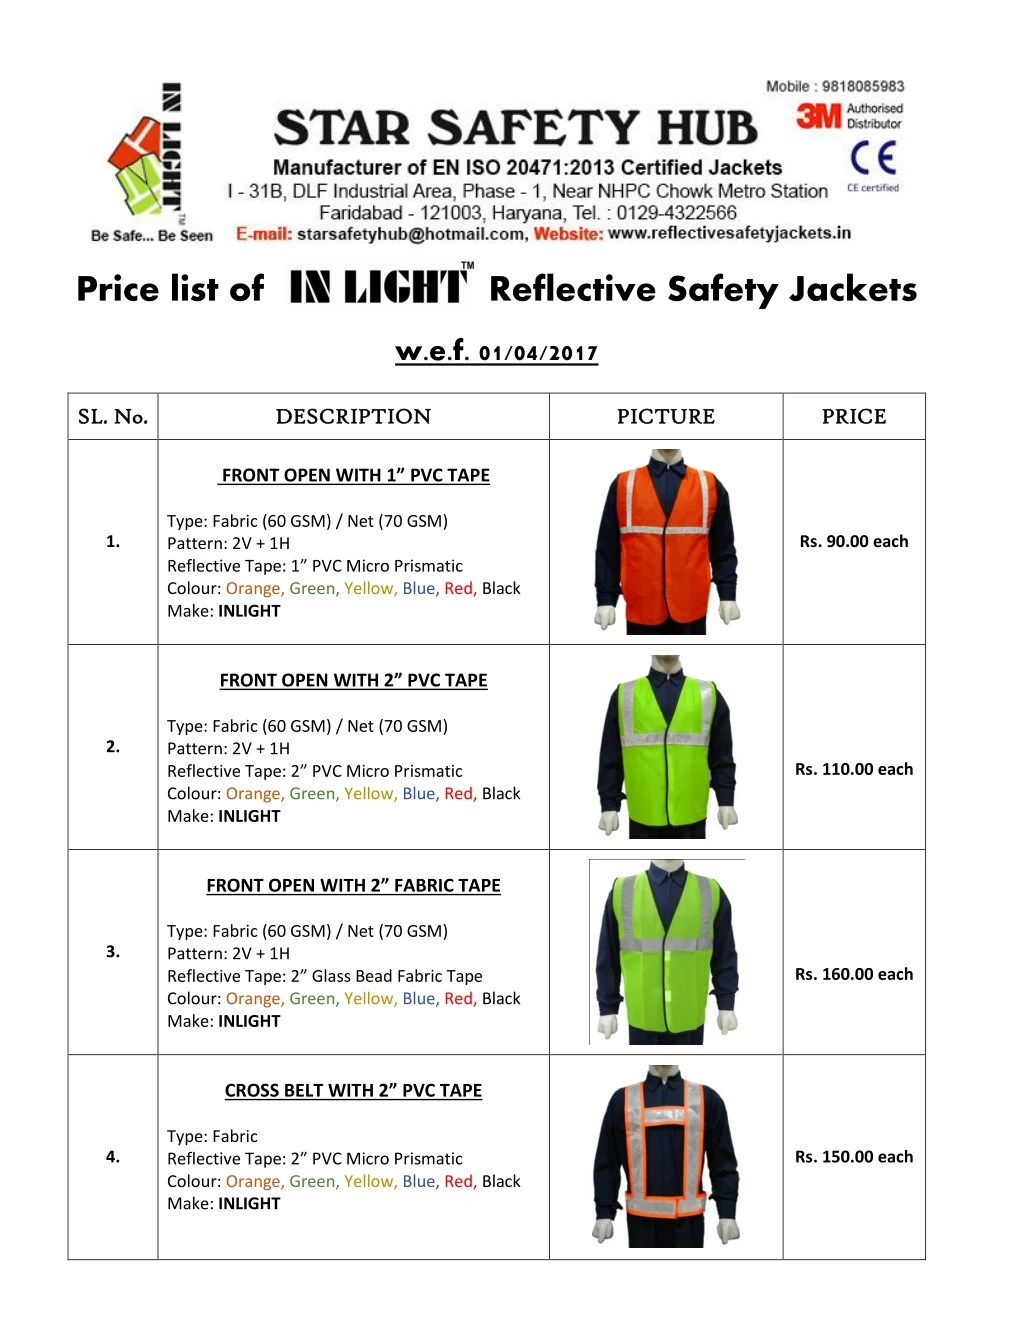 price list of reflective safety jackets